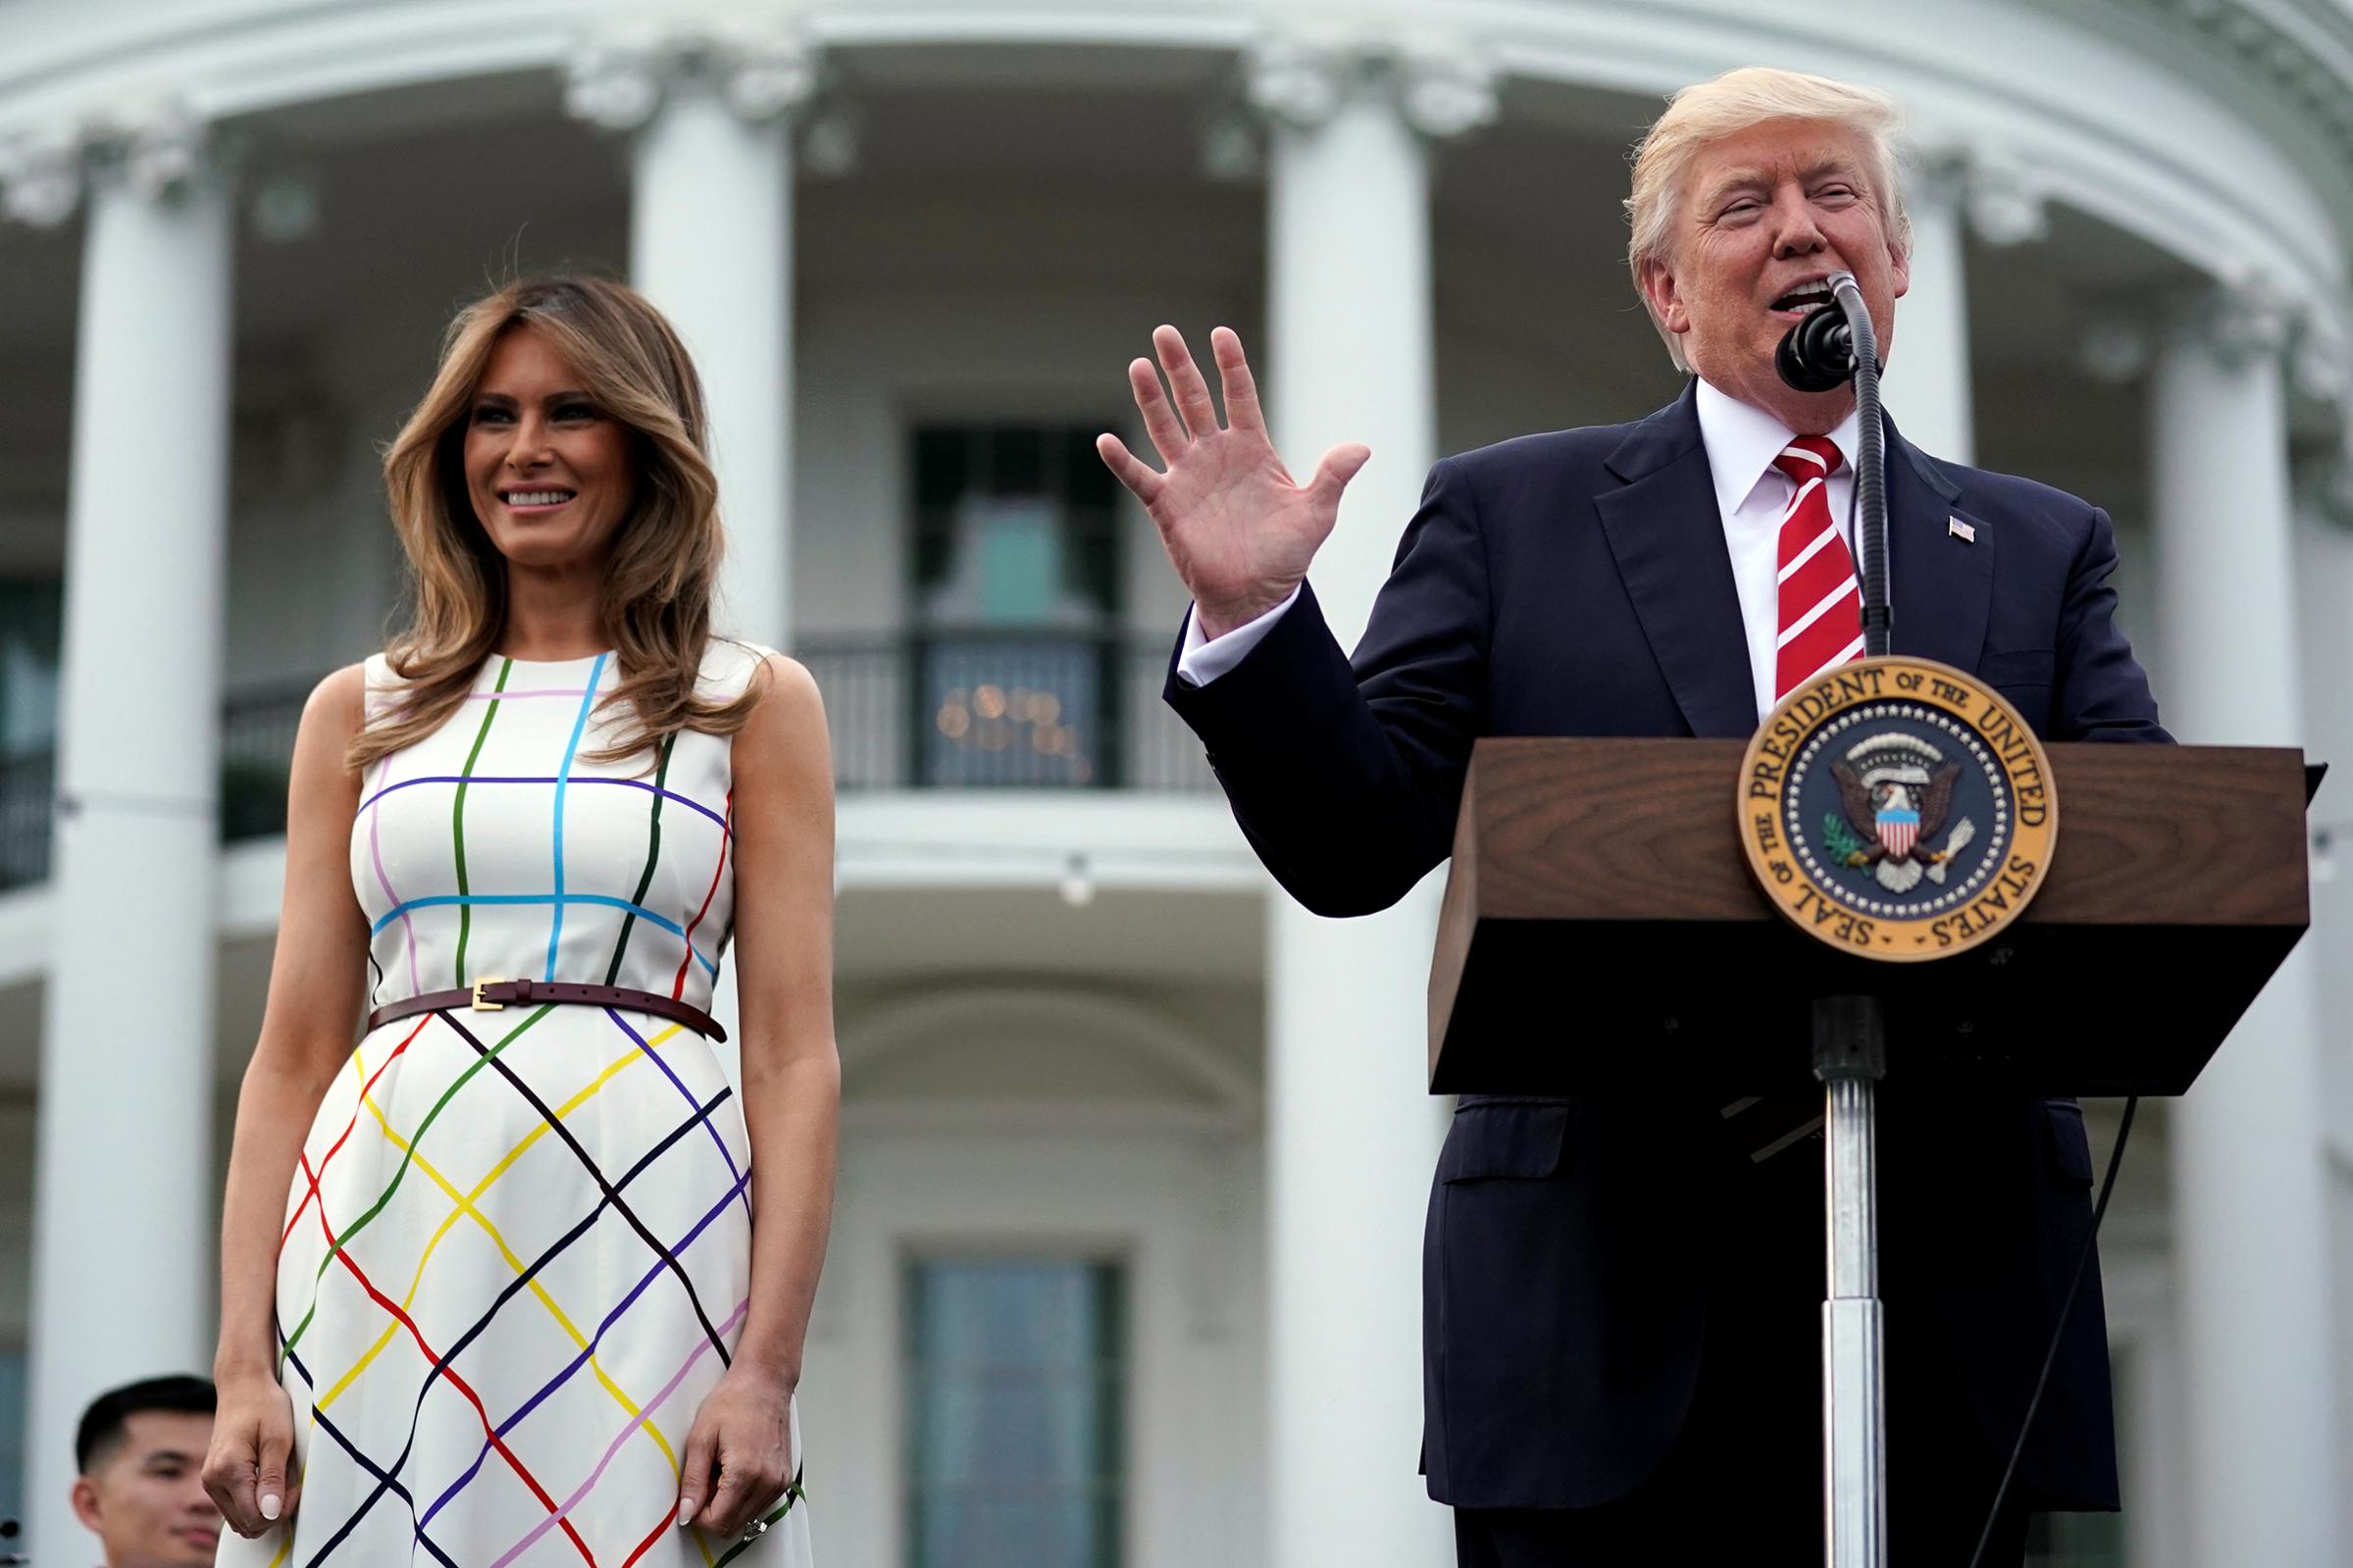 President Donald Trump delivers remarks as he hosts a Congressional picnic event, accompanied by First Lady Melania Trump wearing a dress made in Italy by Greek designer Mary Katrantzou, .at the White House in Washington, U.S., June 22, 2017.